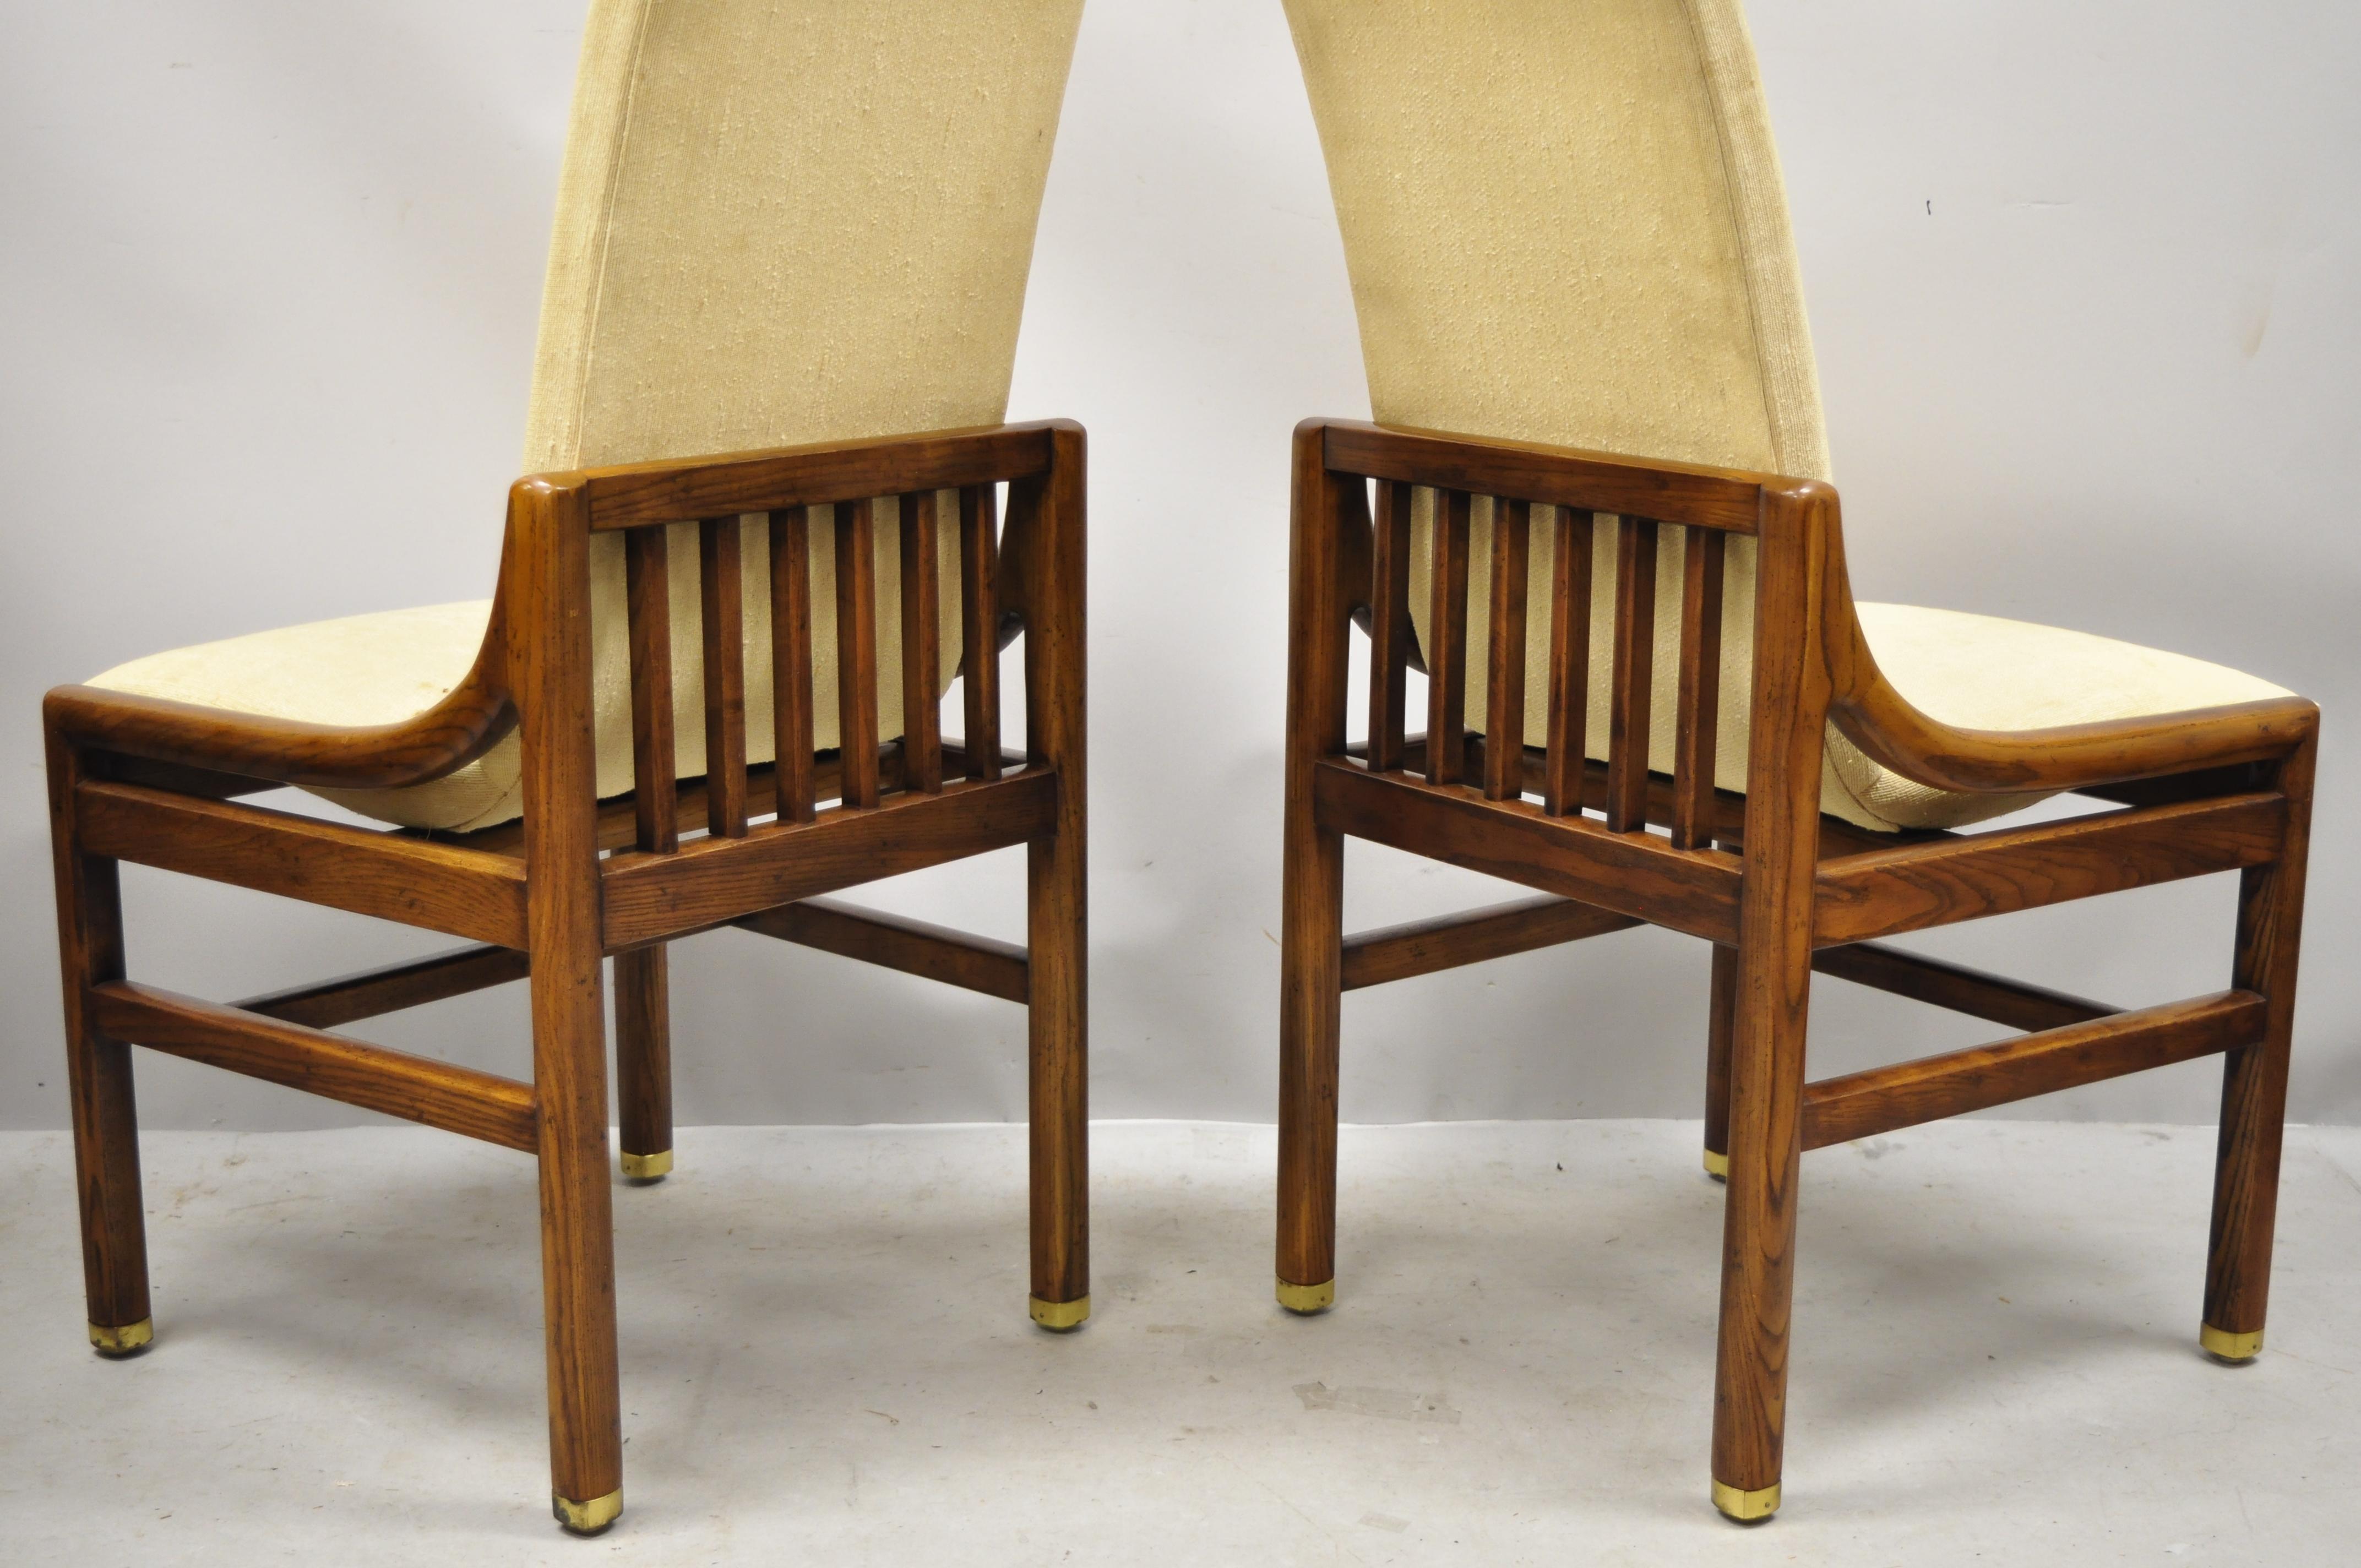 North American Henredon Mid-Century Modern Oak Wood and Brass Modern Dining Side Chairs, a Pair